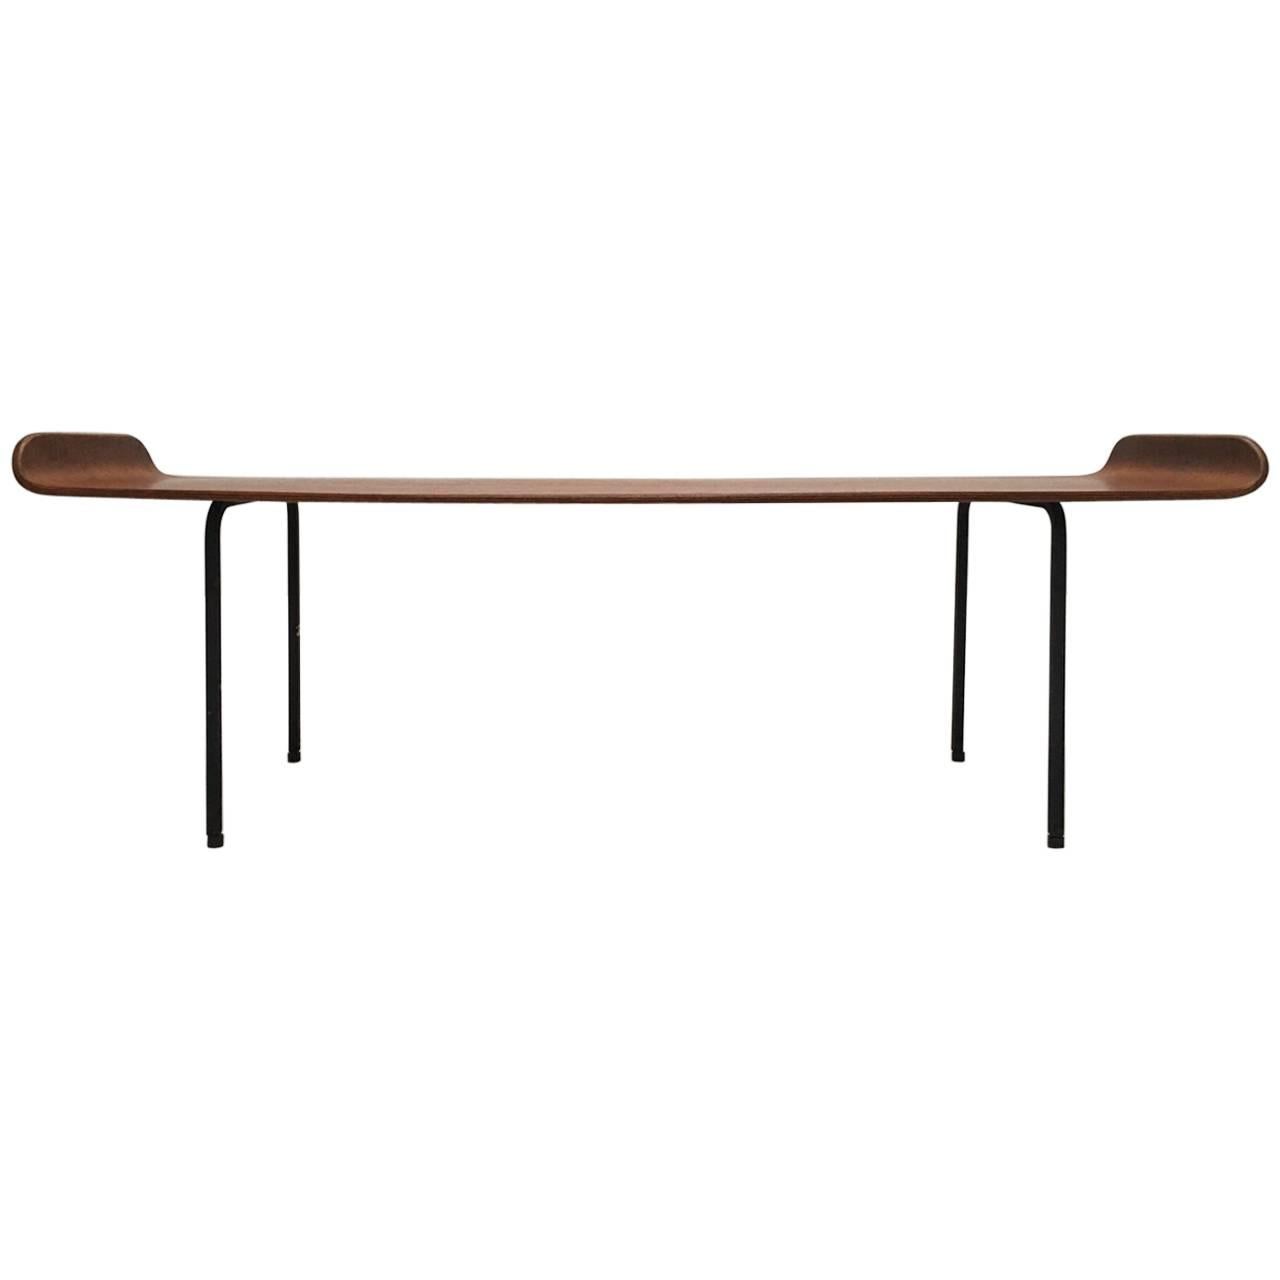 'Pilade' Coffee Table by Campo & Graffi, 1958 with label & impressed artists mark